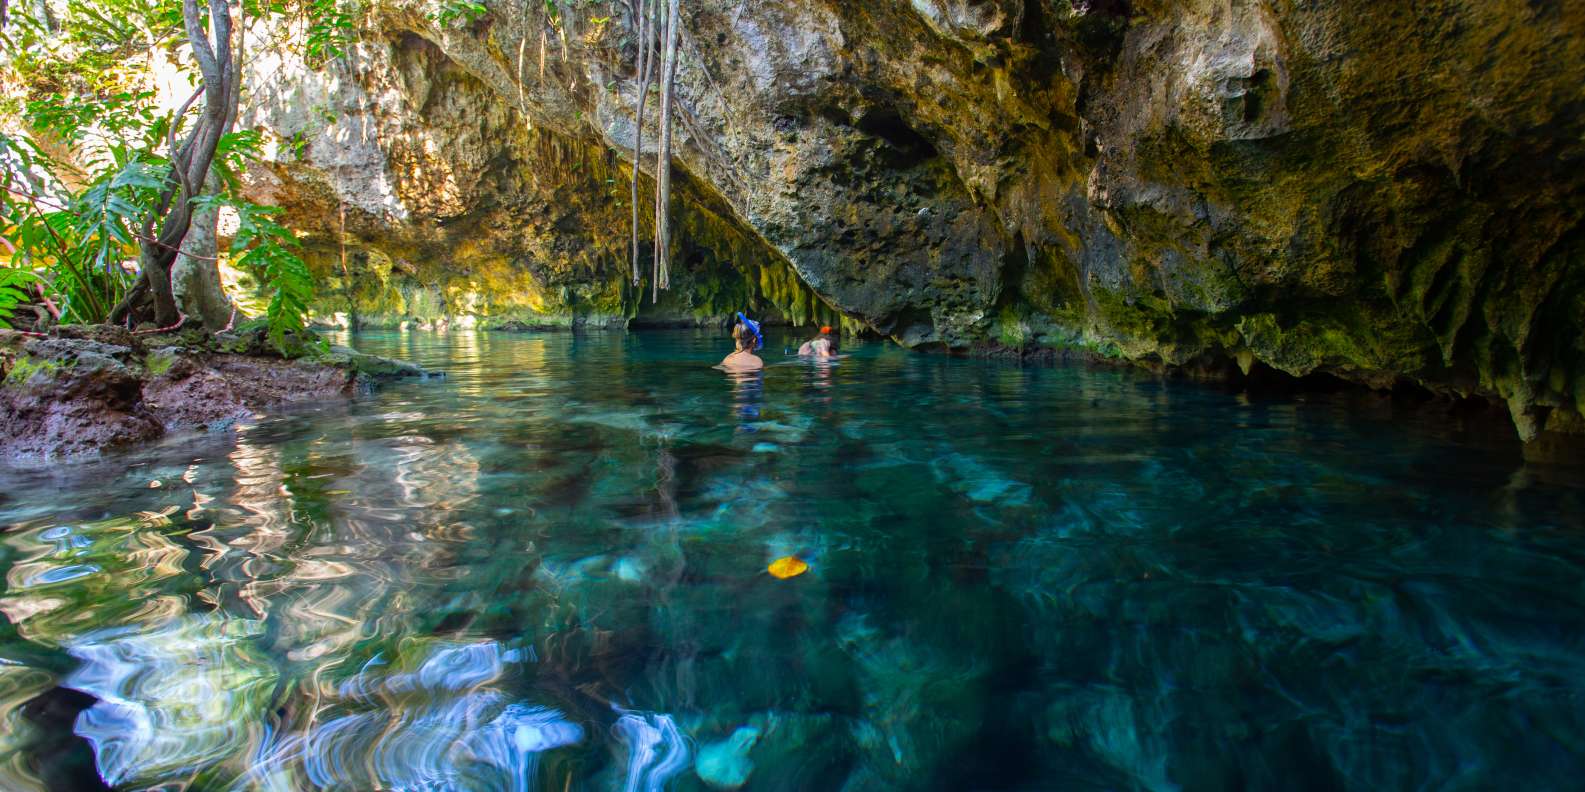 things to do in Tulum